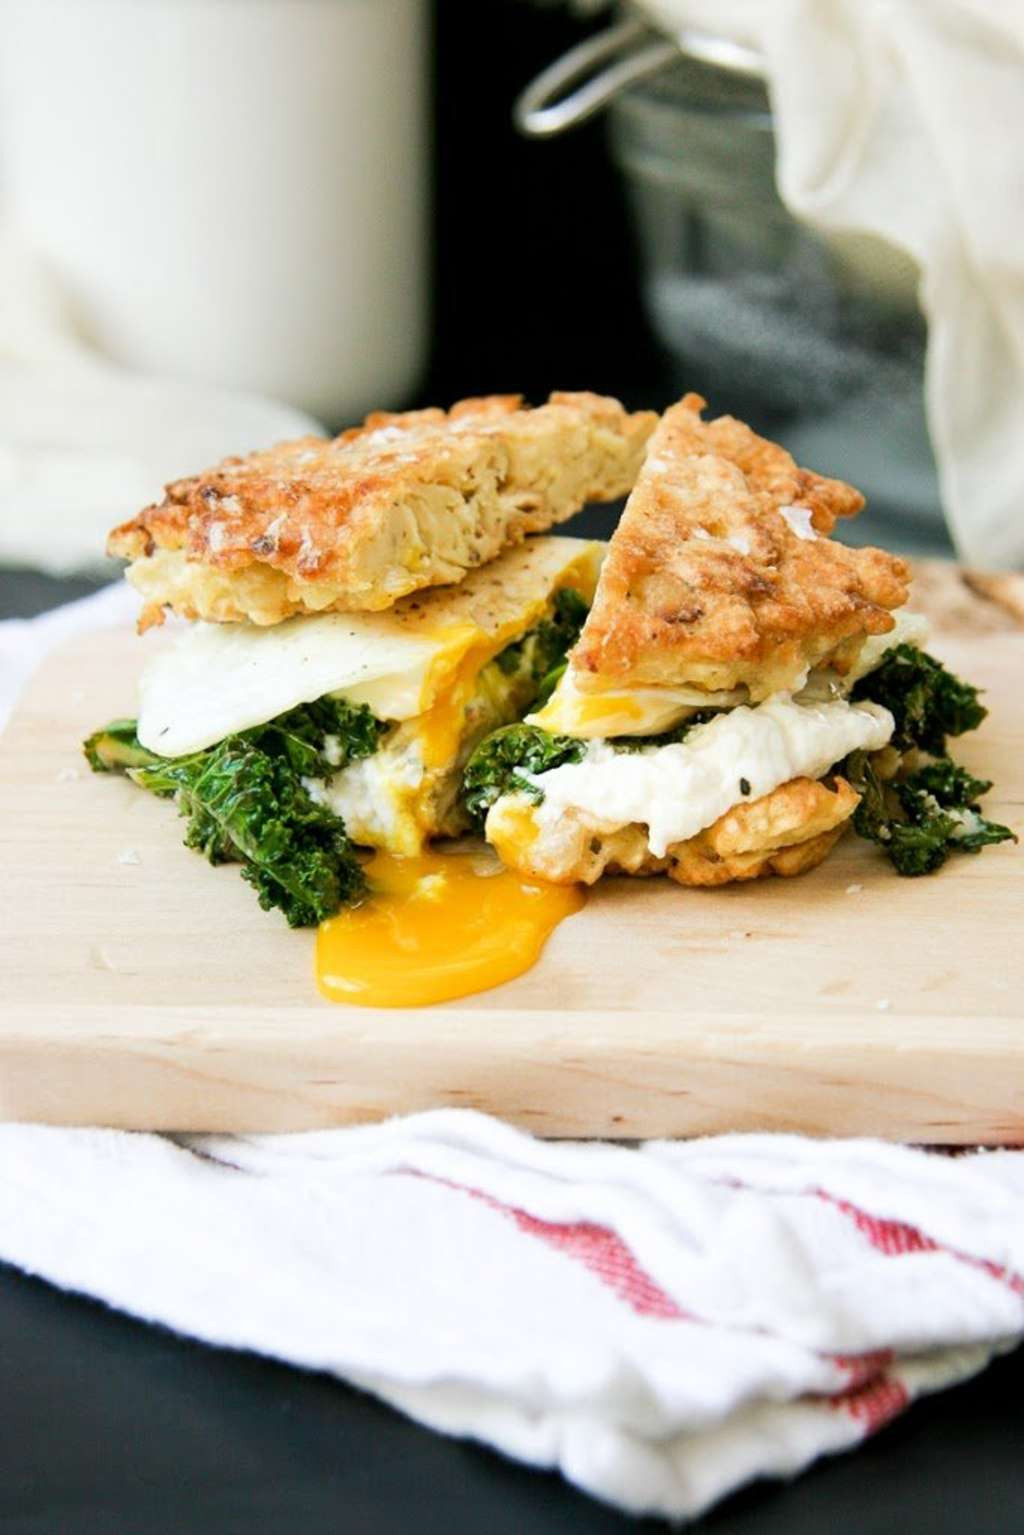 Passover Breakfast Ideas
 This Is the Matzo Brei Breakfast Sandwich You Need for